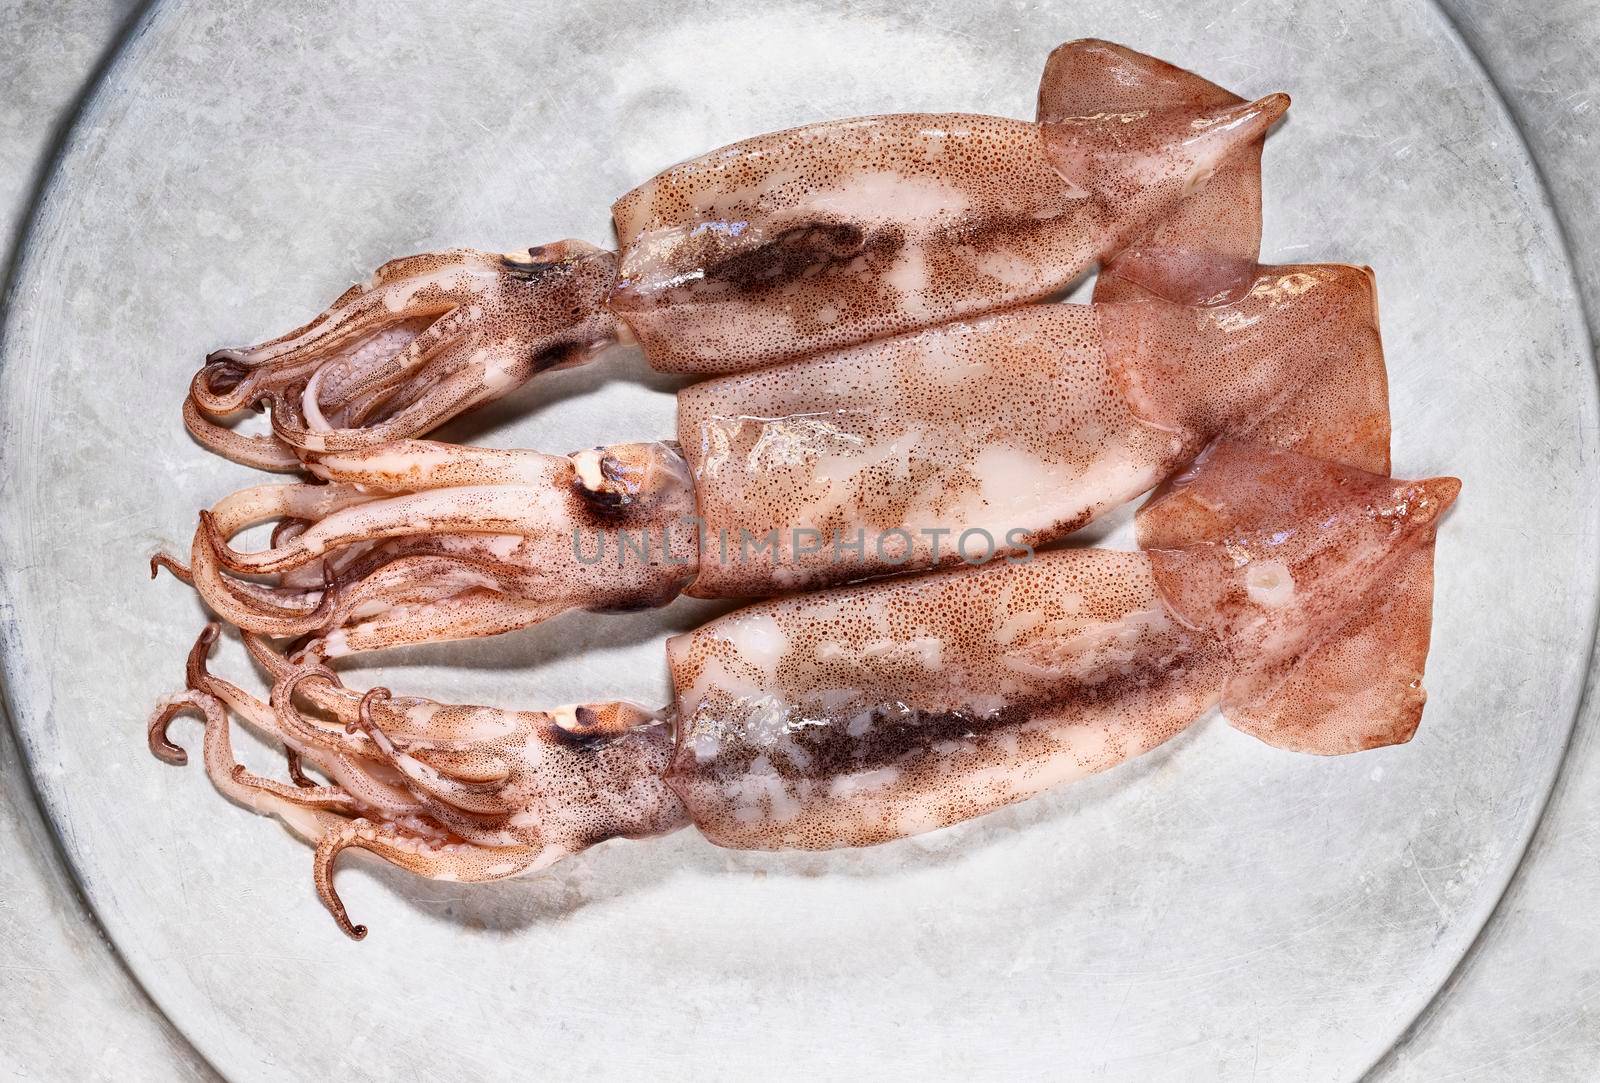  Uncooked squid fish on plate by victimewalker